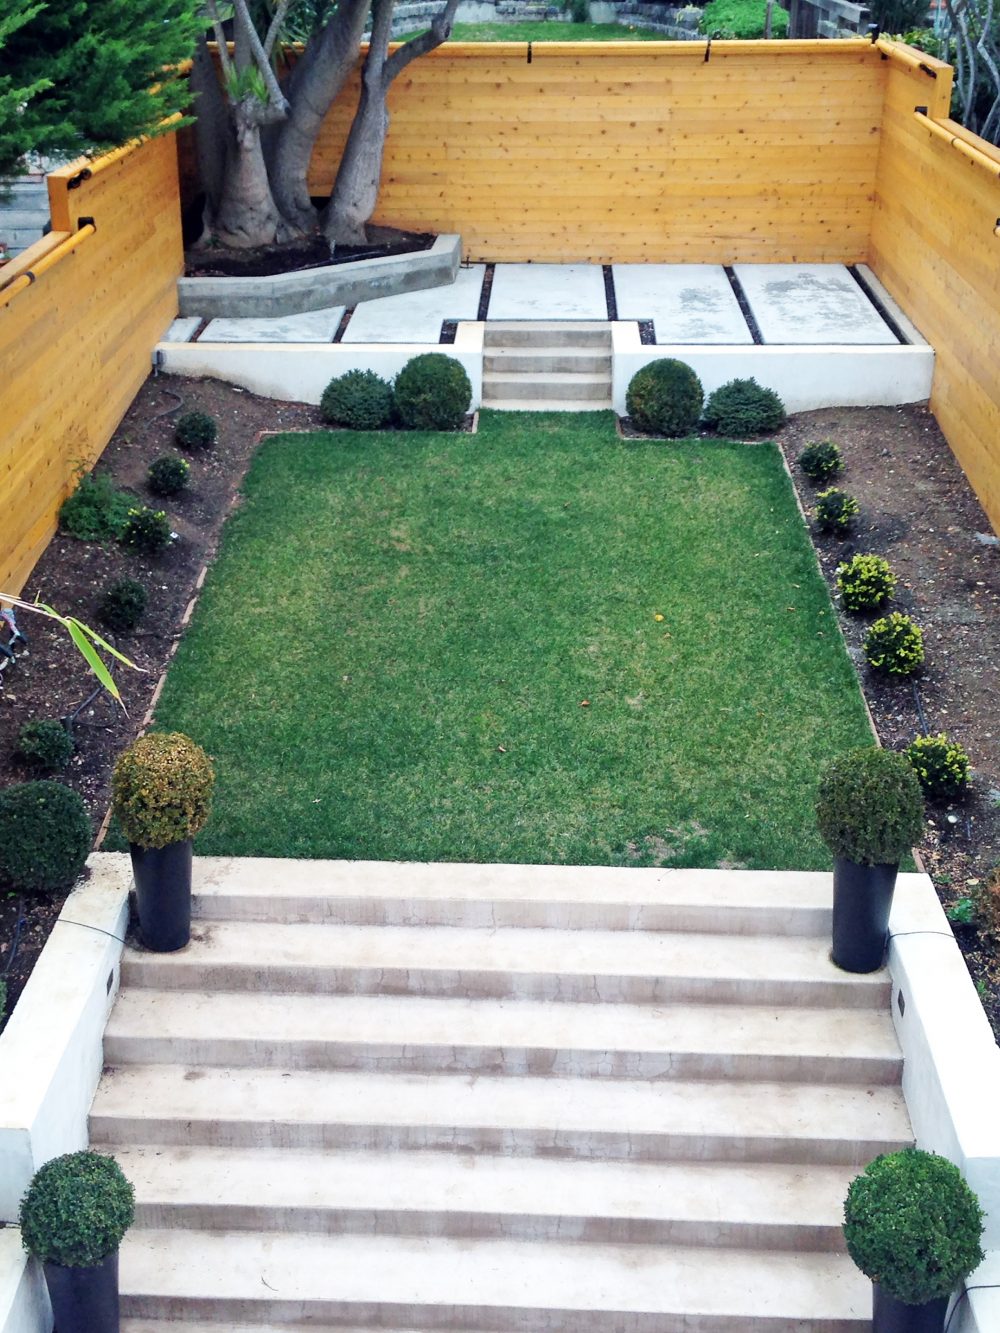 Arial view of long rectangular backyard and stone steps leading up to a grassy area and third elevated cement patio surrounded by slat fencing and landscaping